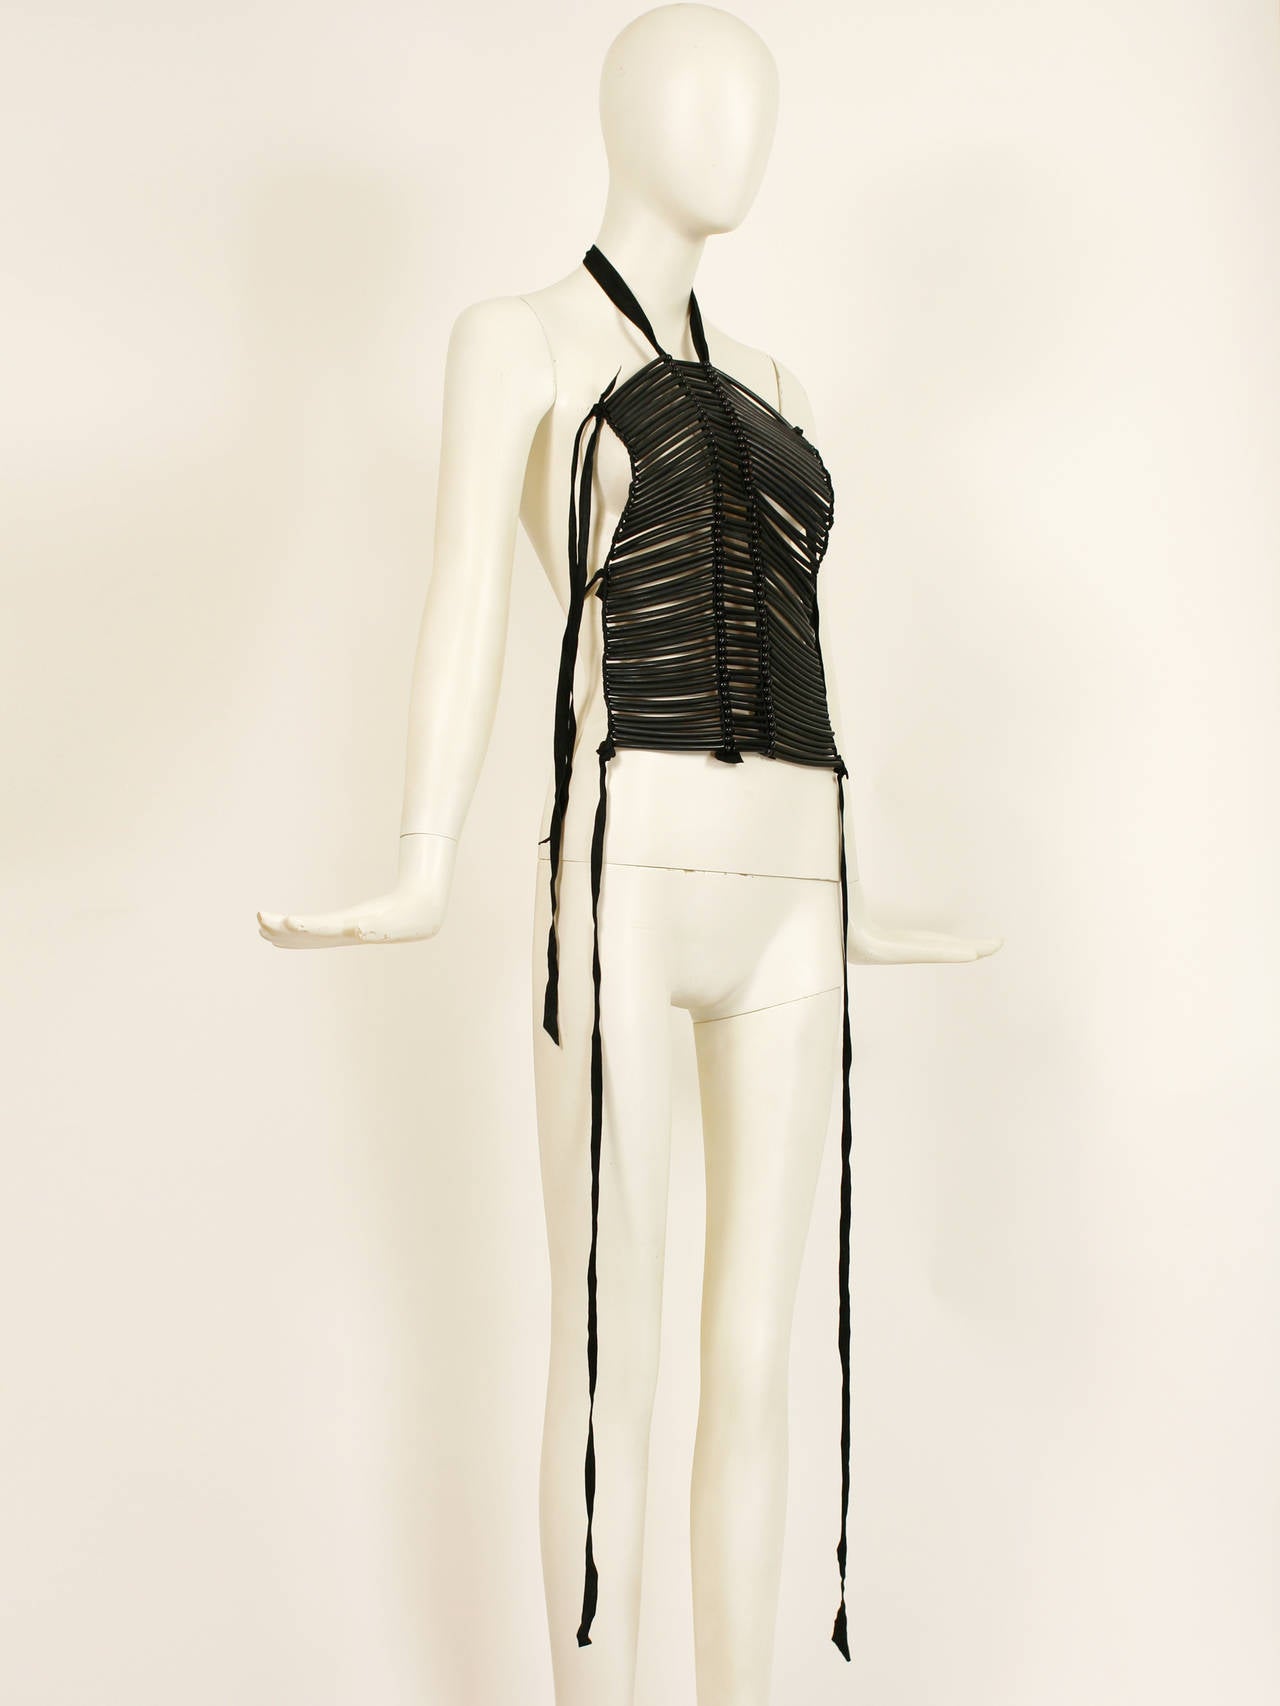 Helmut LANG black iconic breast plate top dating from 1991-92 when      Helmut Lang designed North American Indian inspired runway collections.  It is made up of rows of horizontal rubber tubes and beads, and secured by suede laces.  Excellent